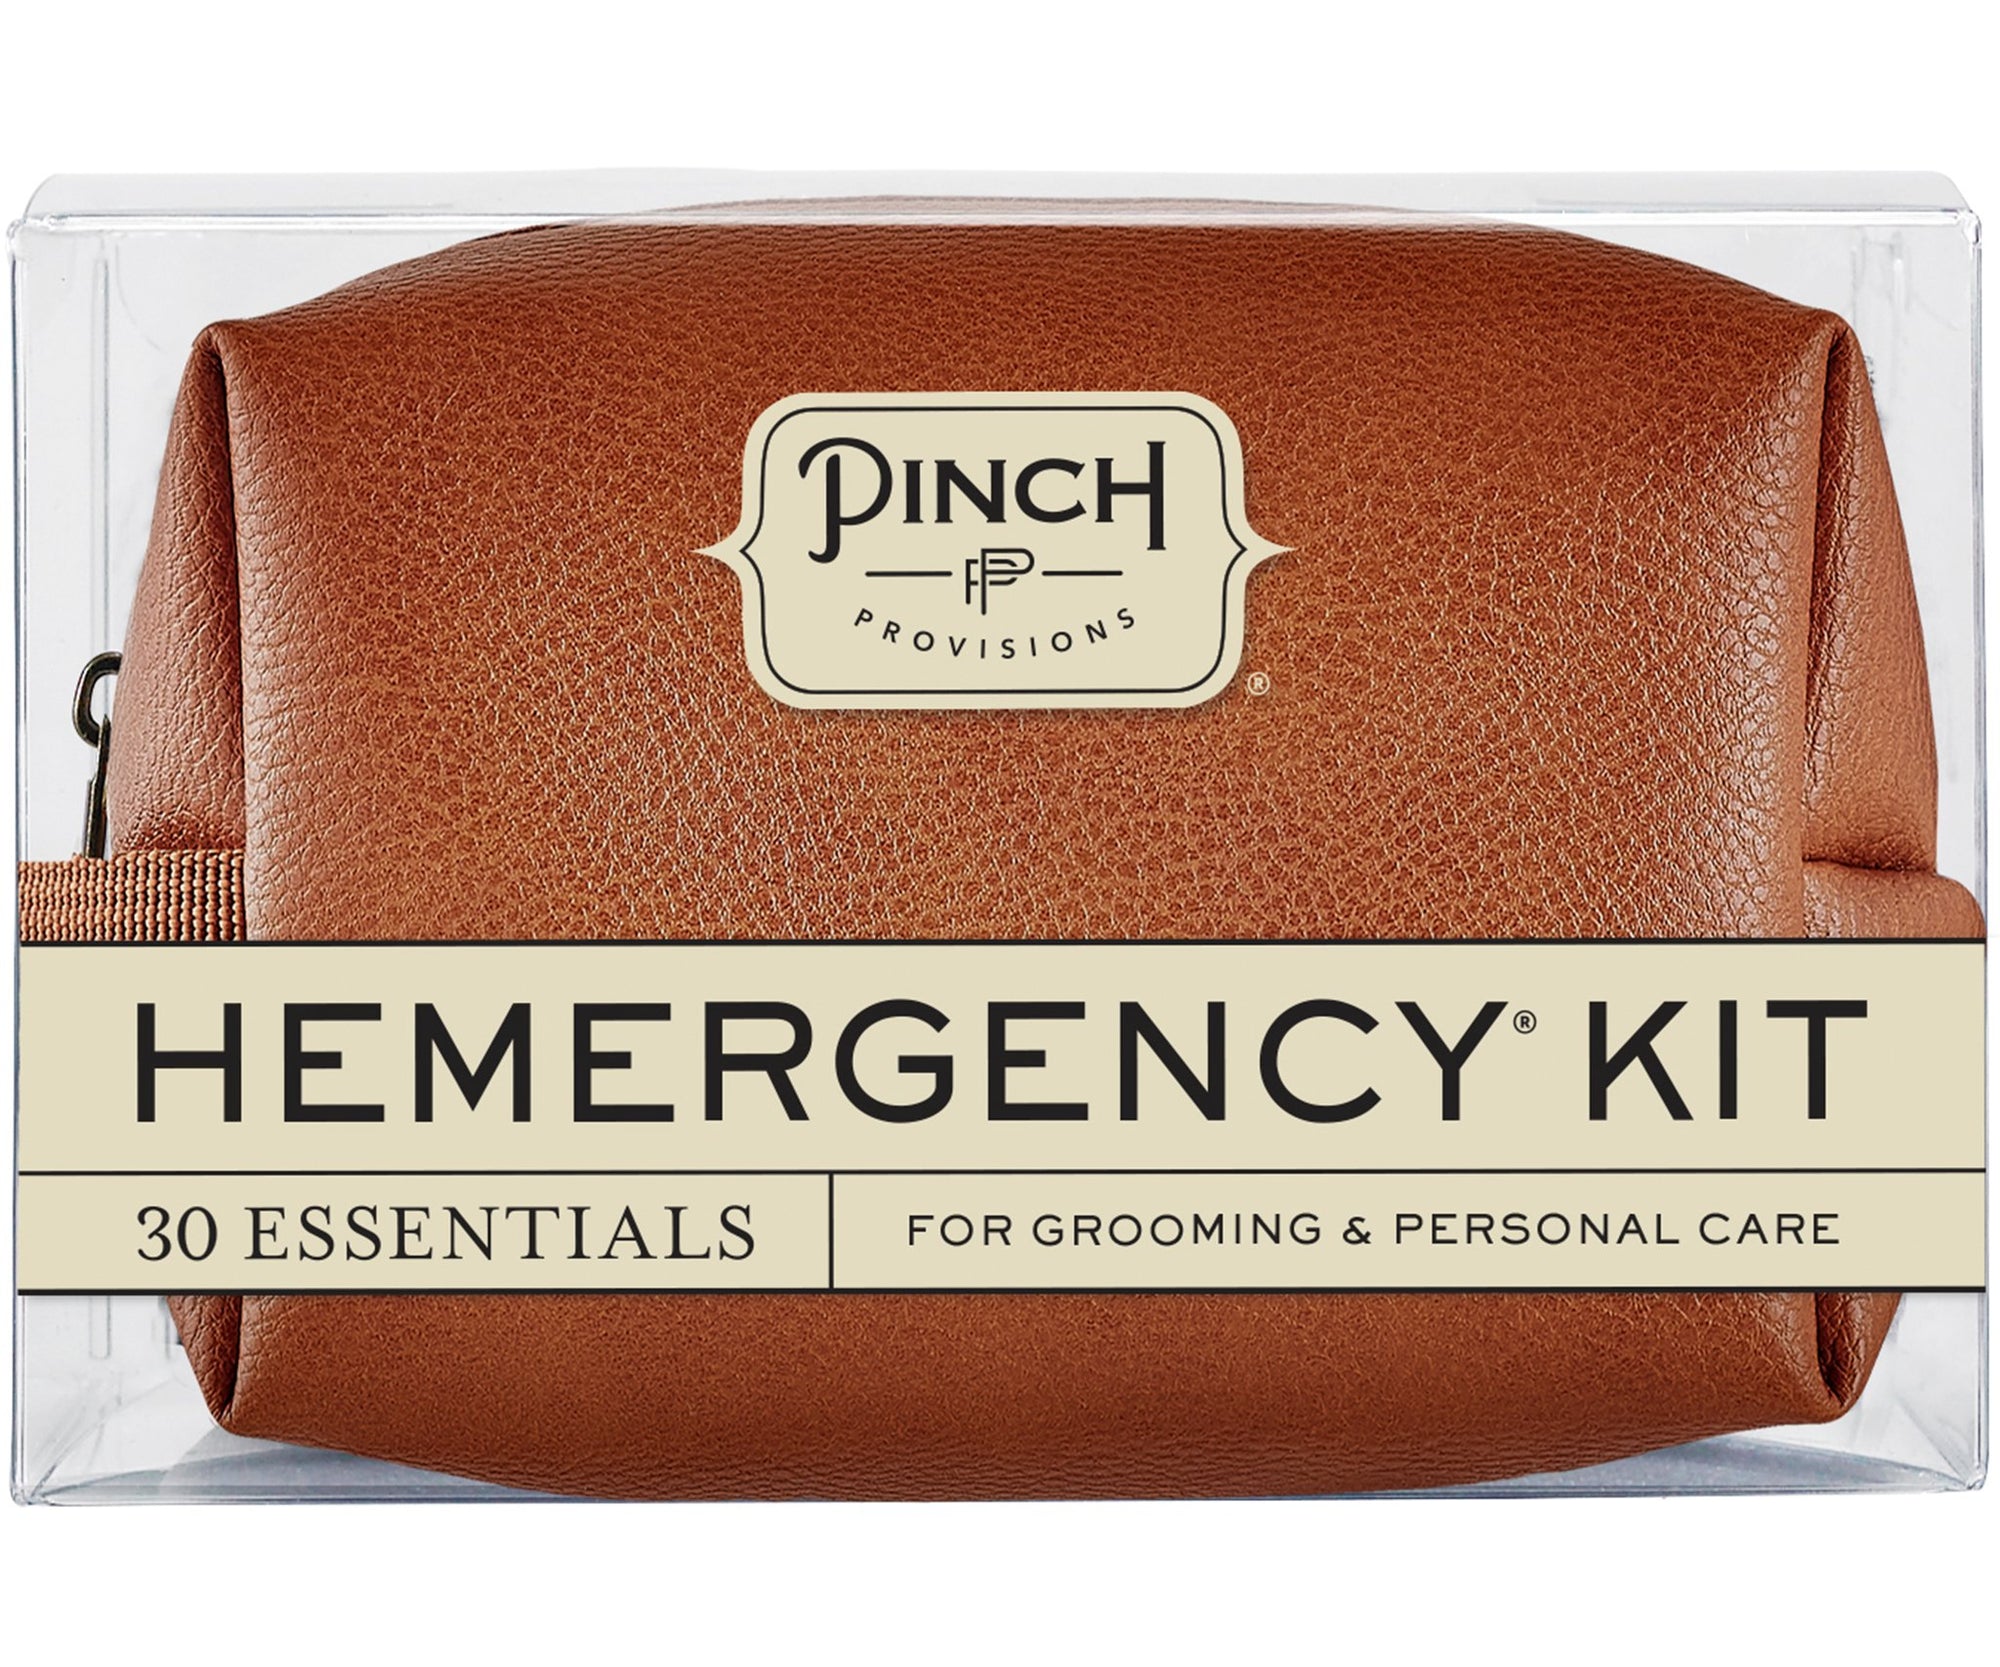 Hemergency Kit- Grooming and Personal Care Kit for Men - Abigail Fox Designs